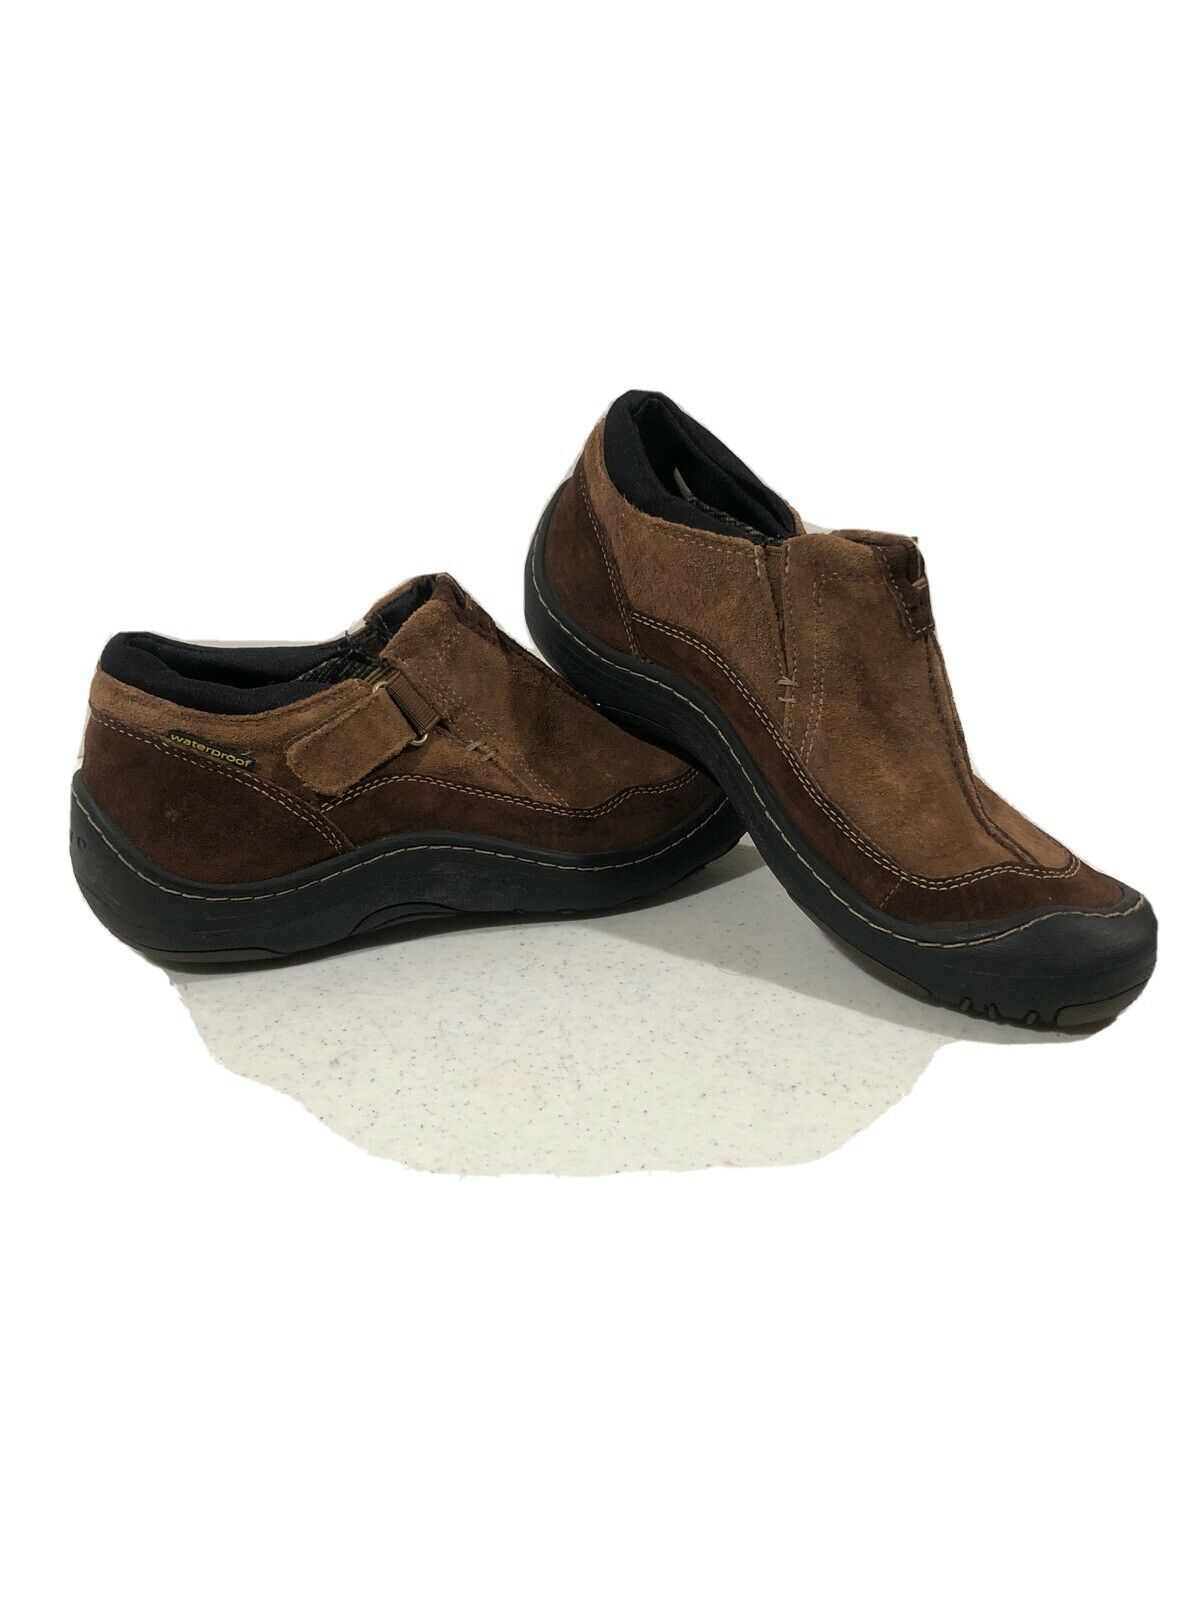 Prevo women’s by Clark size 7.5 waterproof brown two-tone suede casual shoes